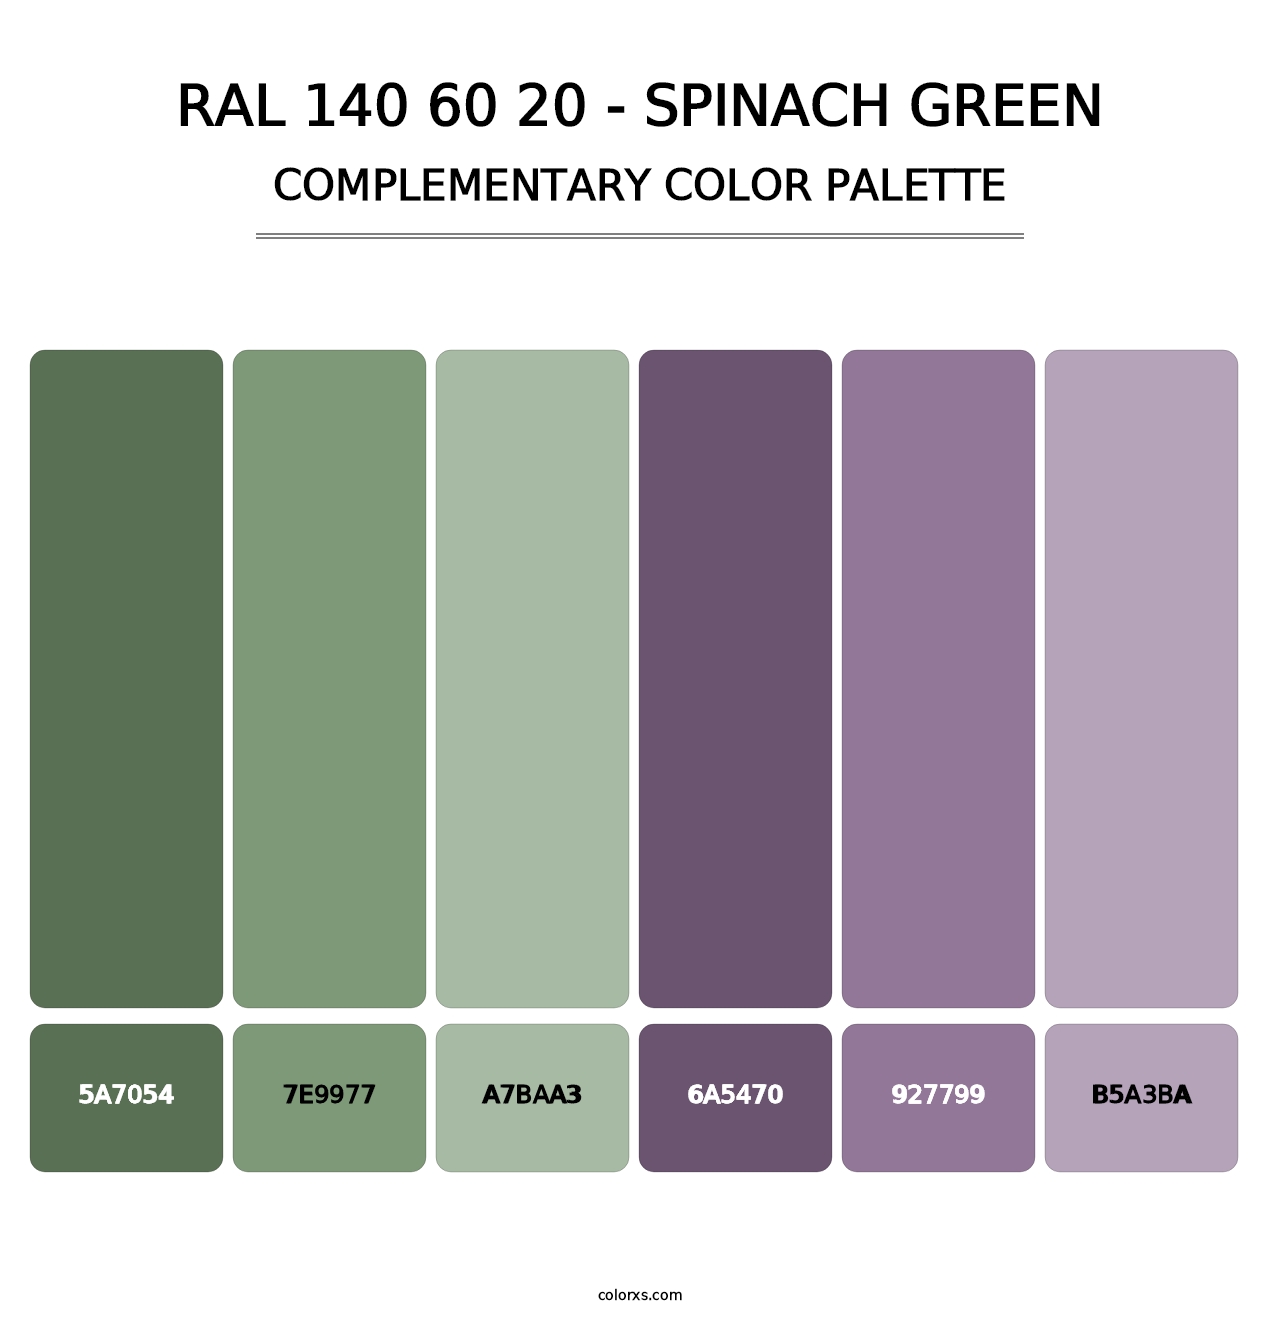 RAL 140 60 20 - Spinach Green - Complementary Color Palette